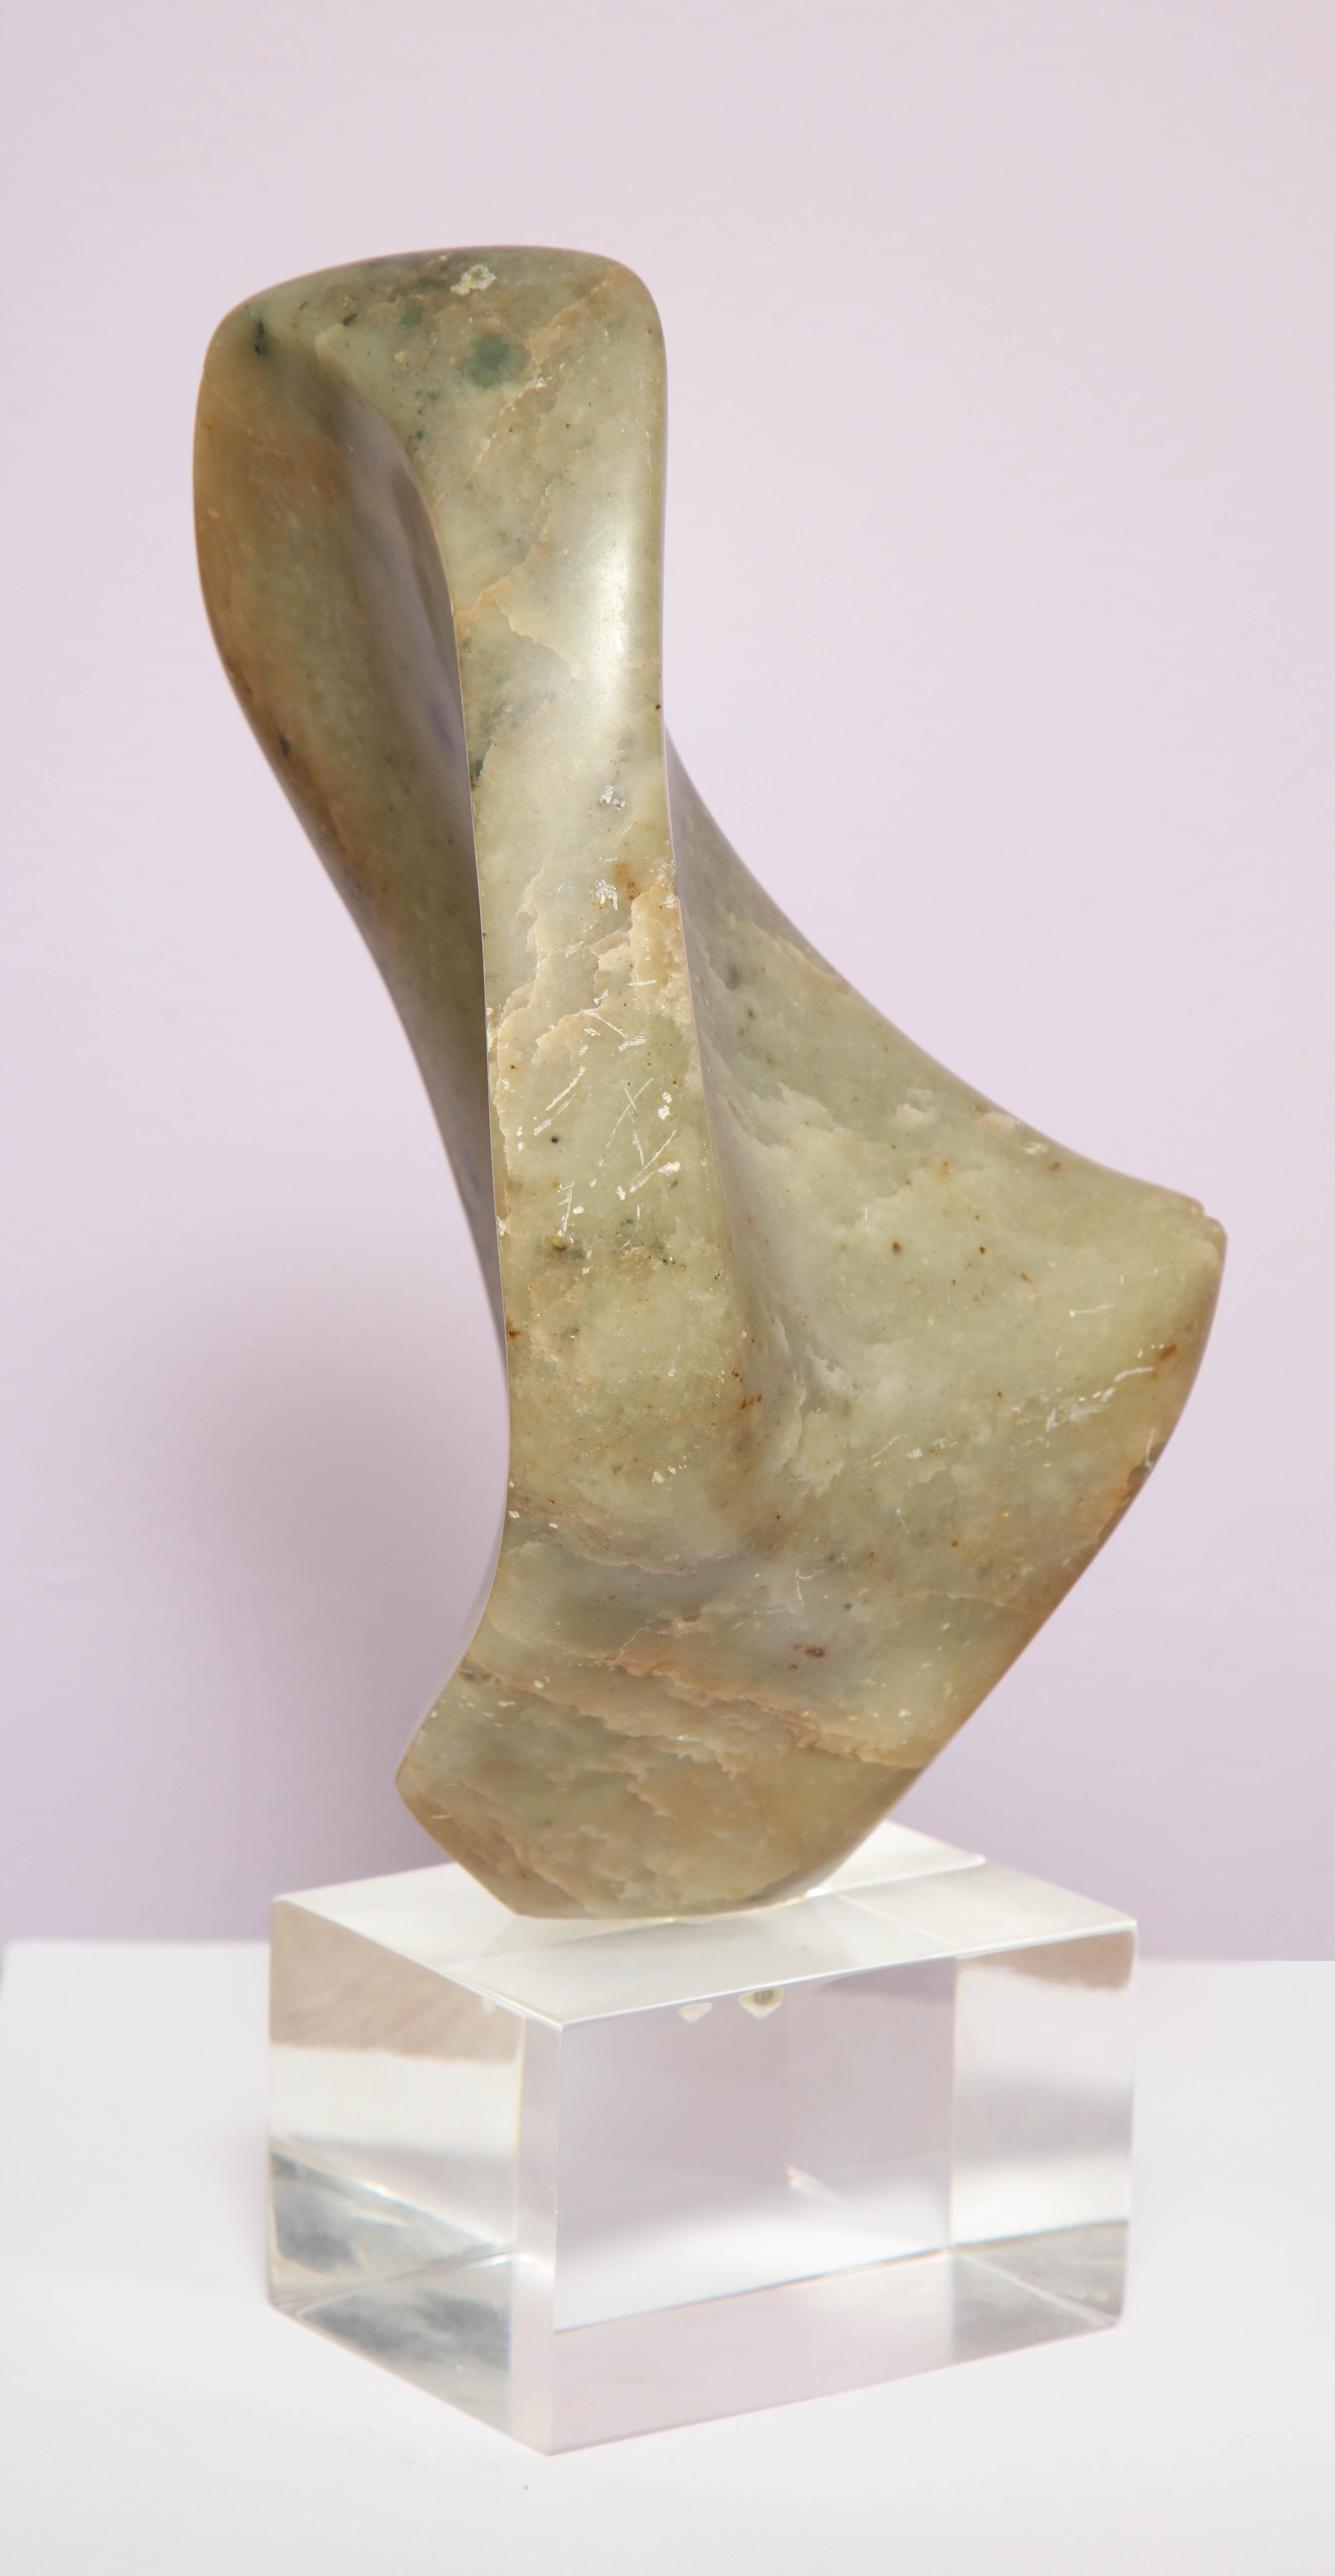 The biomorphic honed stone mounted on a Lucite base.